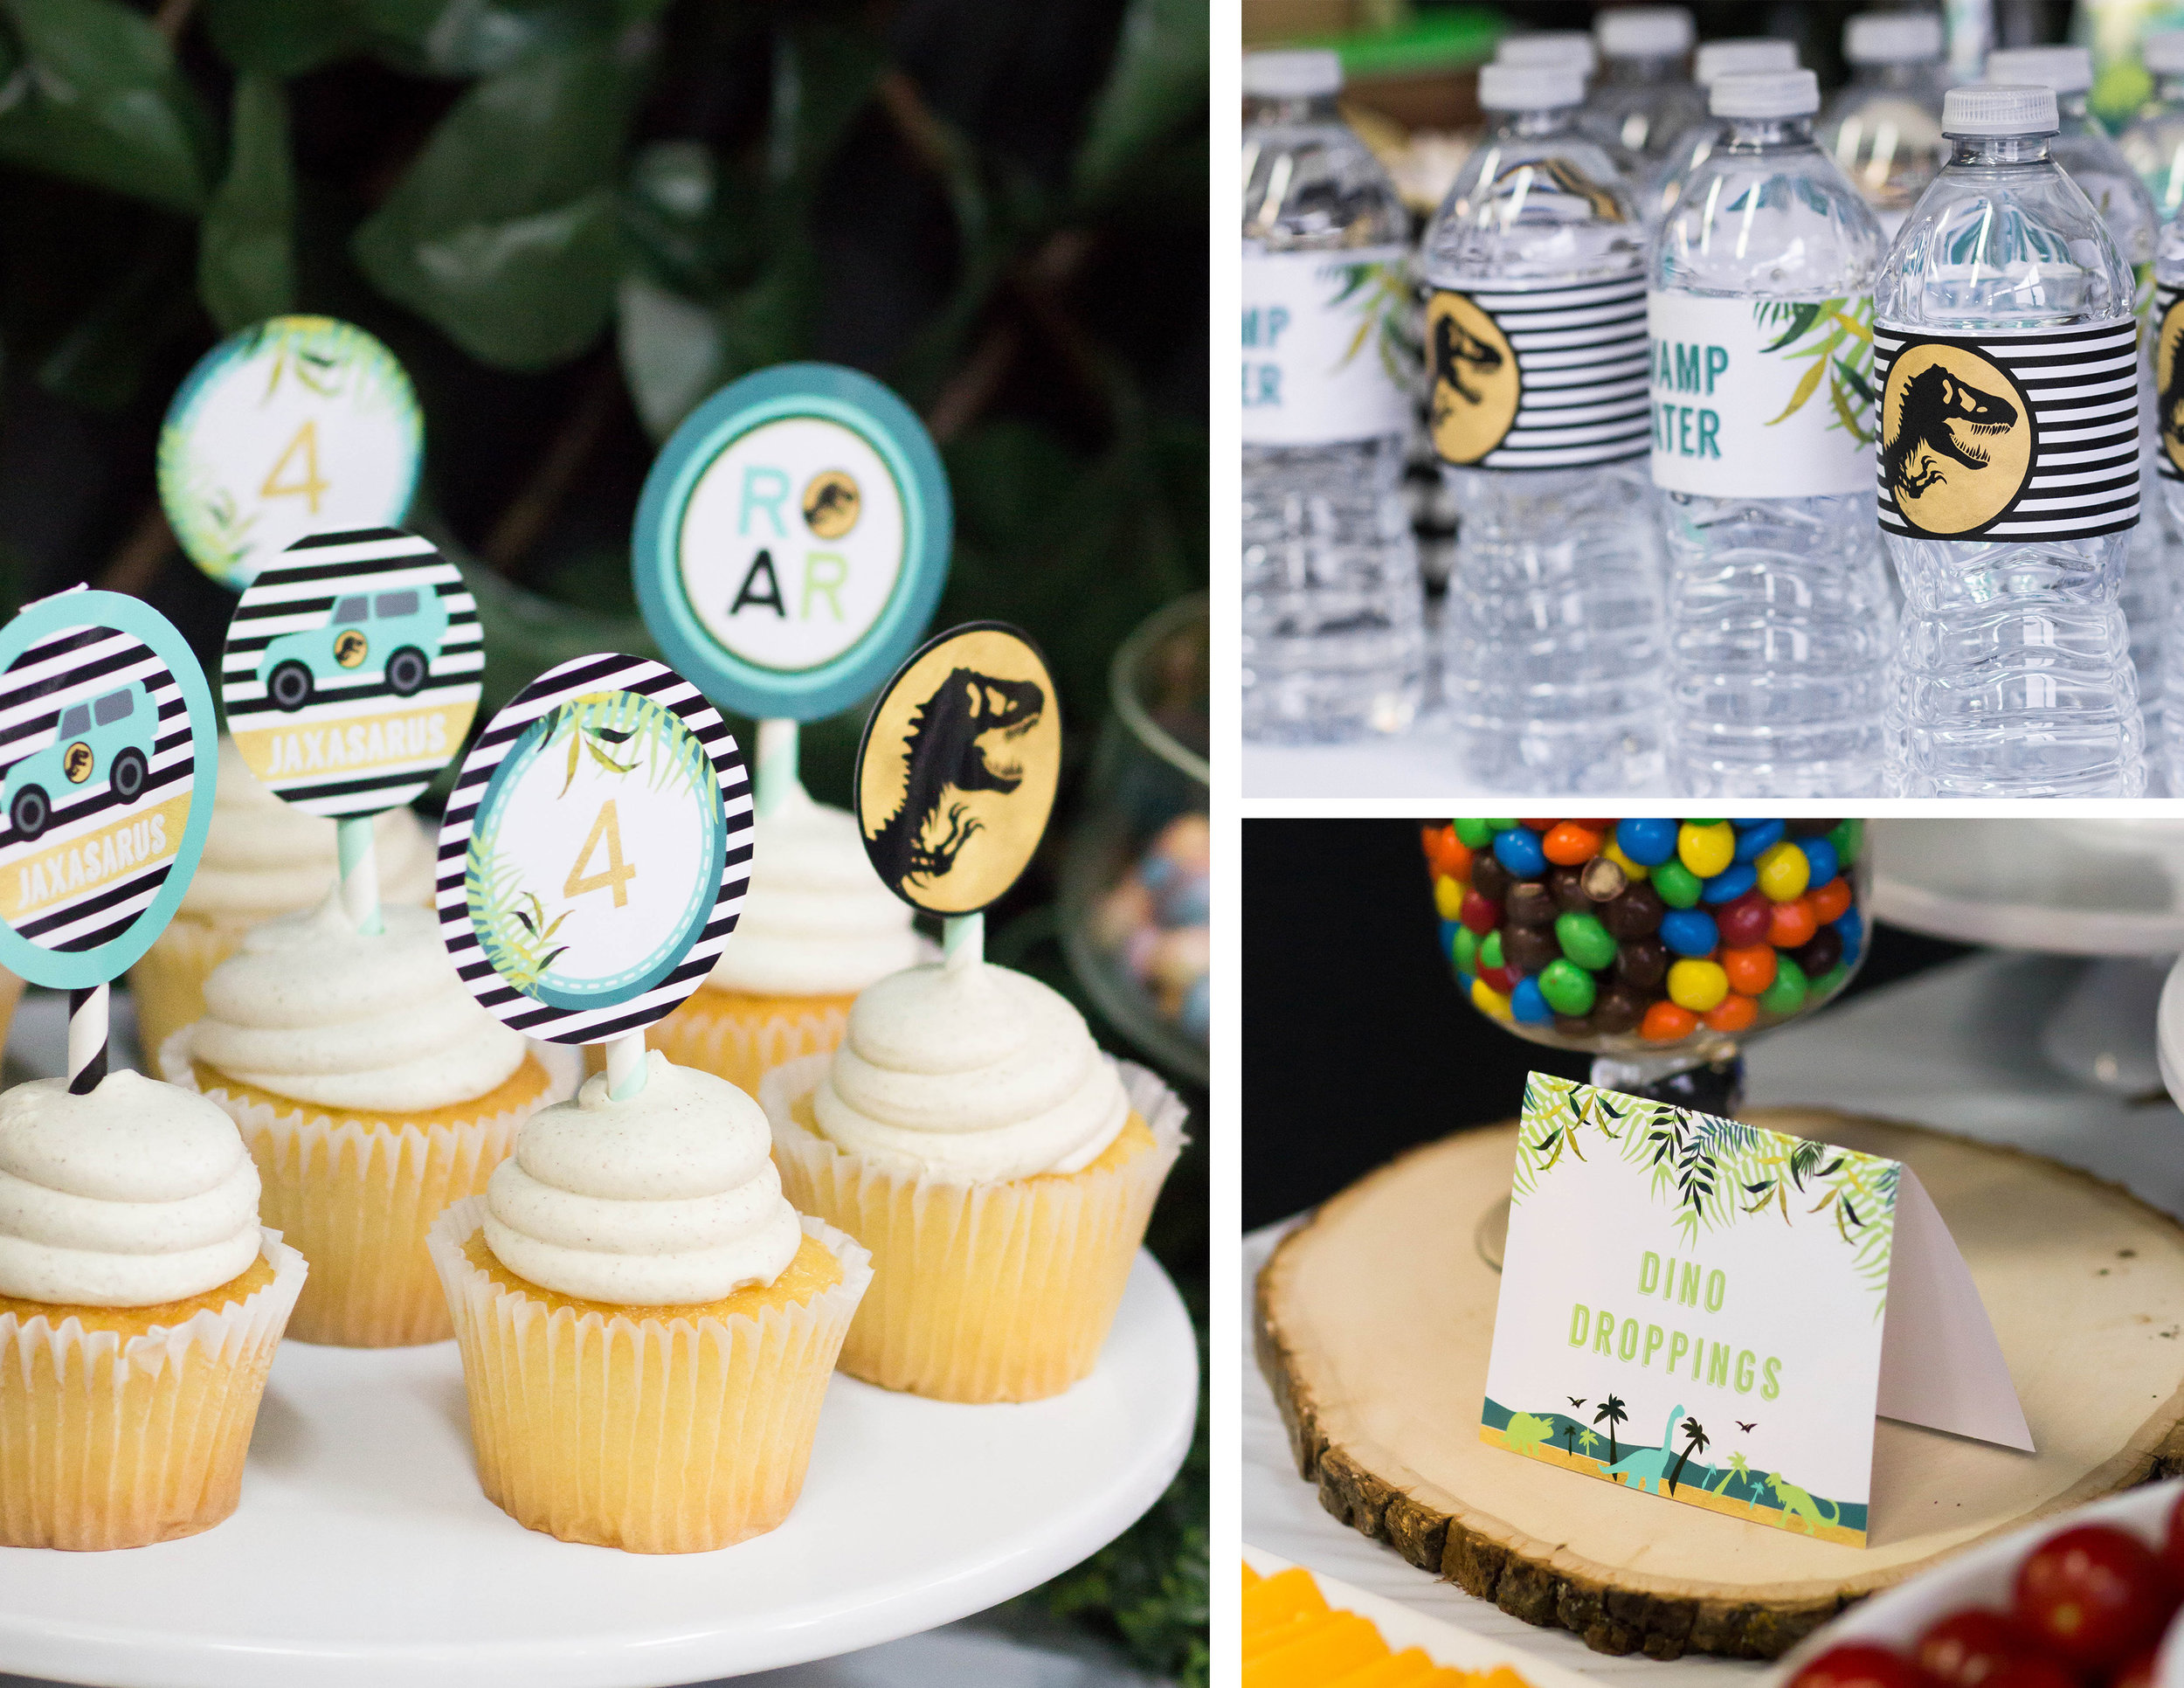 Dinosaur party printables, ideas, and free cupcake toppers from shopmkkm.com